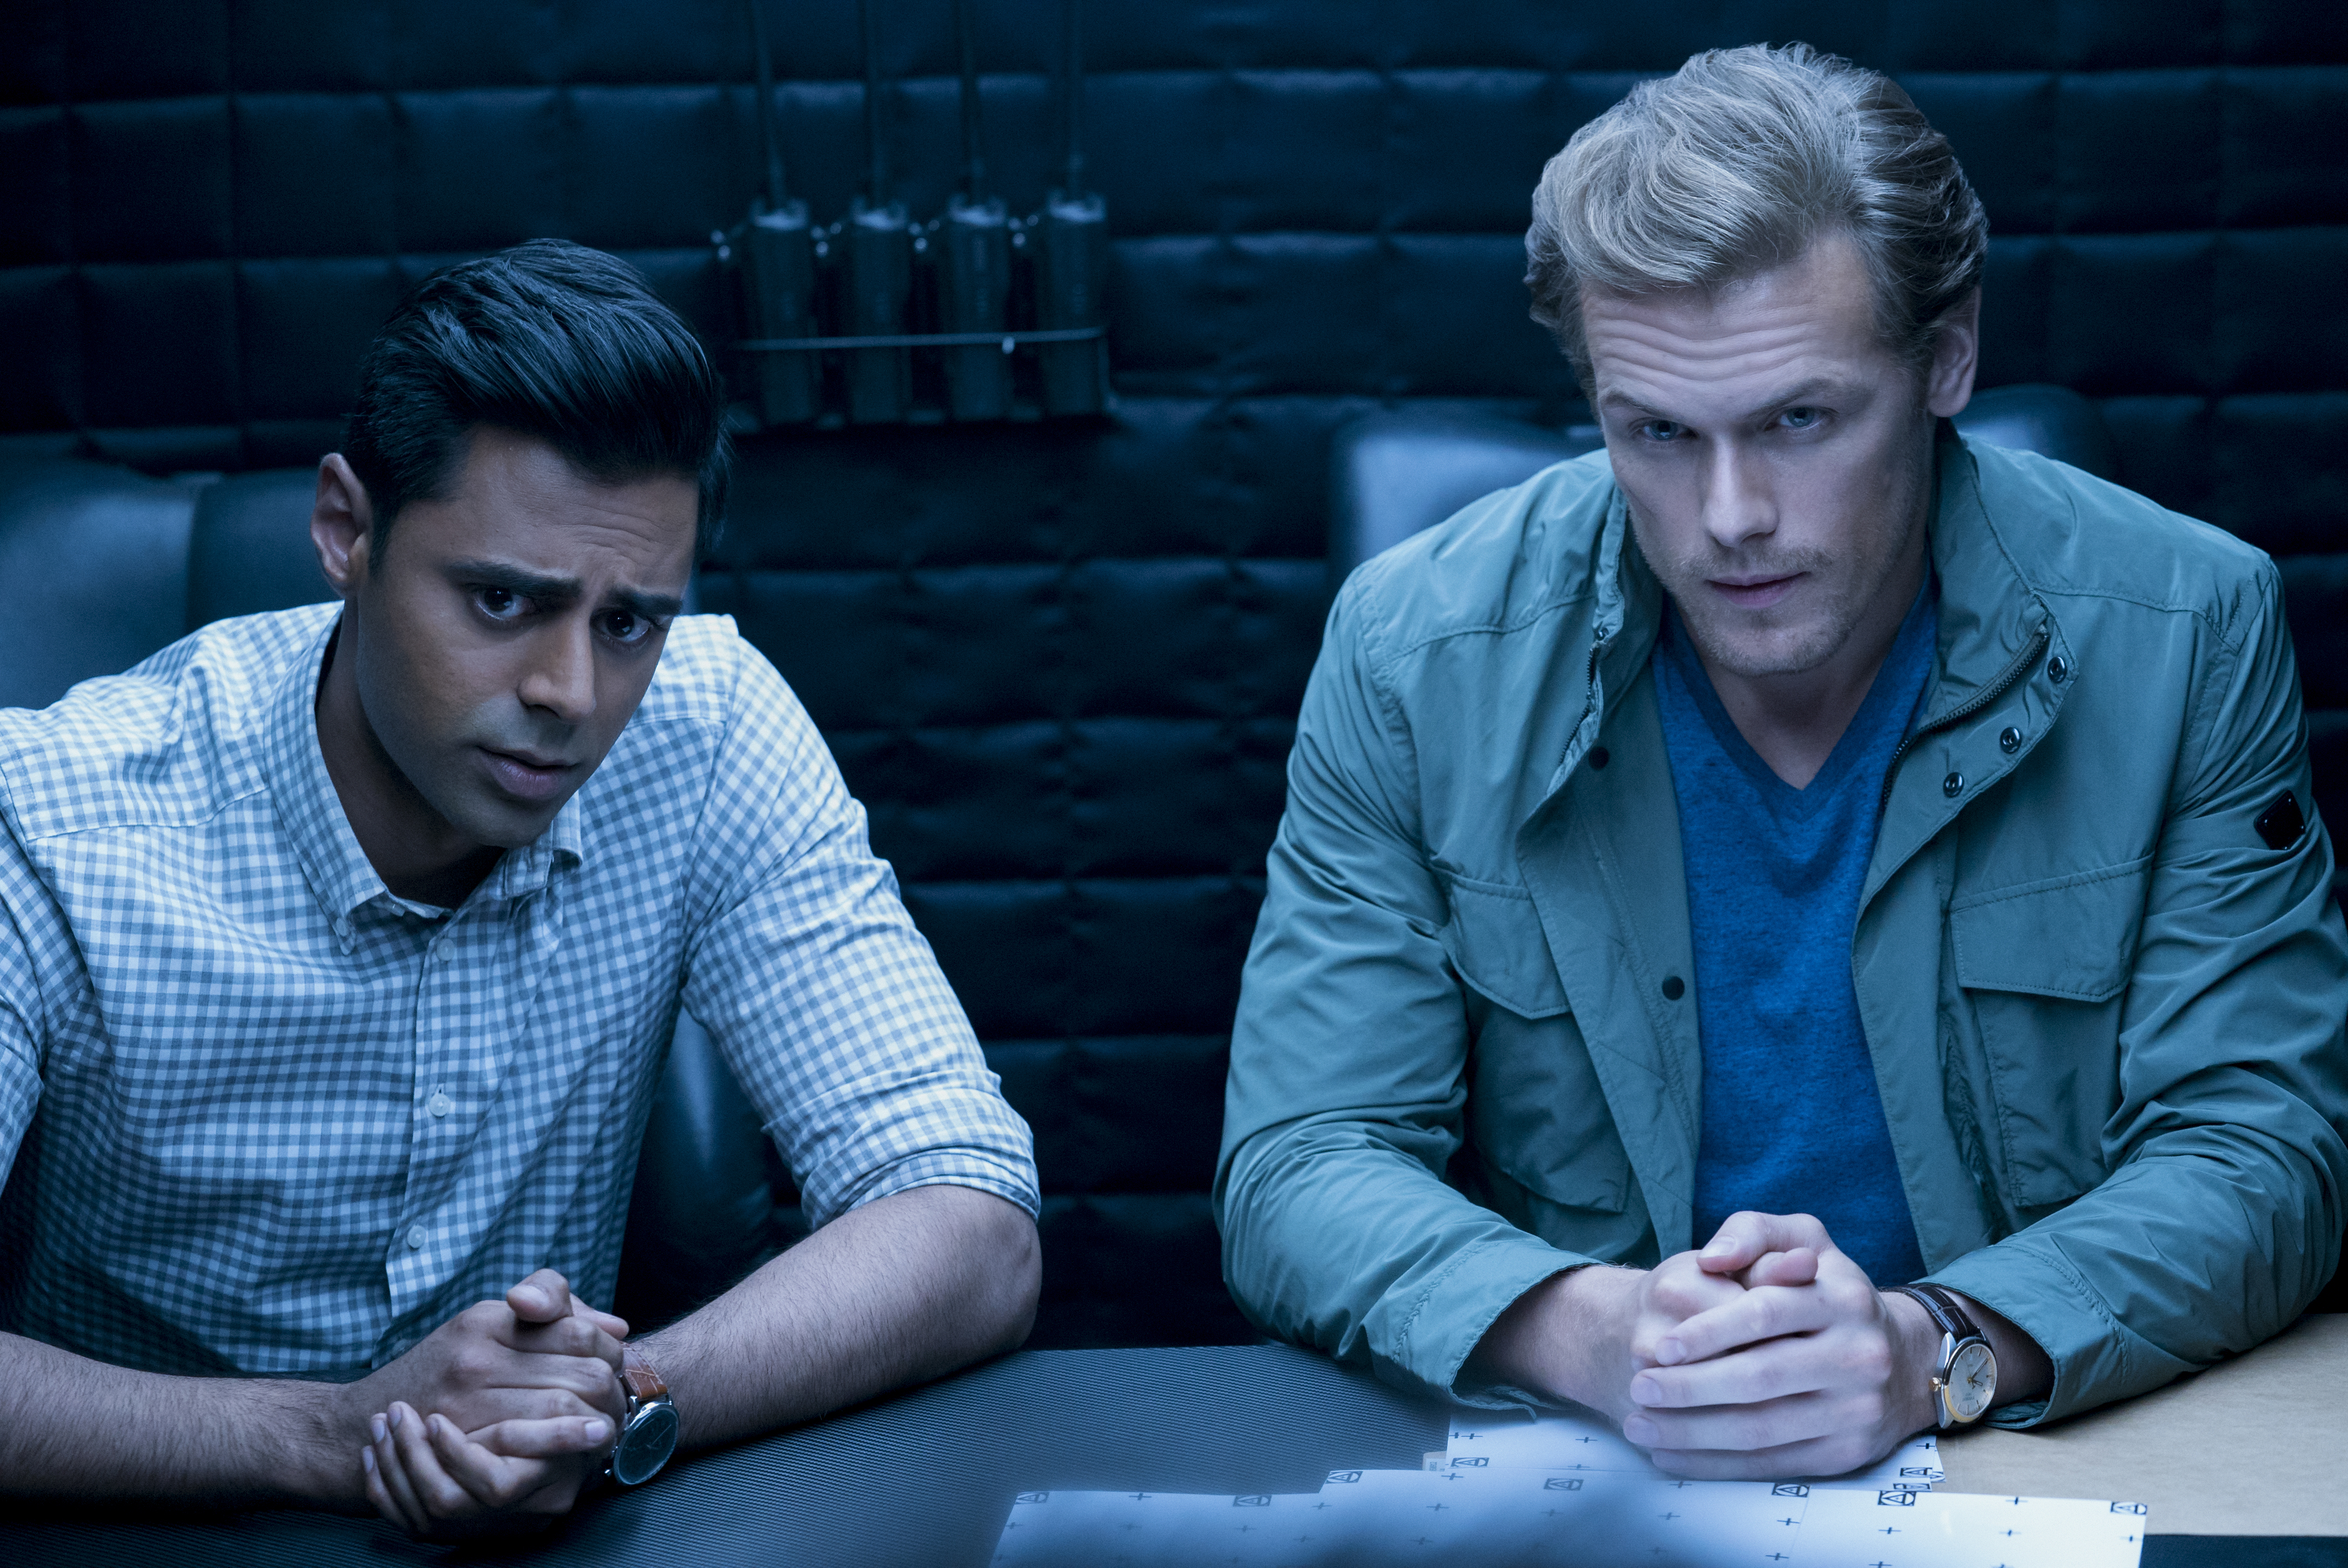  Hasan Minhaj as &quot;Duffer&quot; and Sam Heughan as &quot;Sebastian&quot; in THE SPY WHO DUMPED ME. Photo by Hopper Stone/SMPSP 